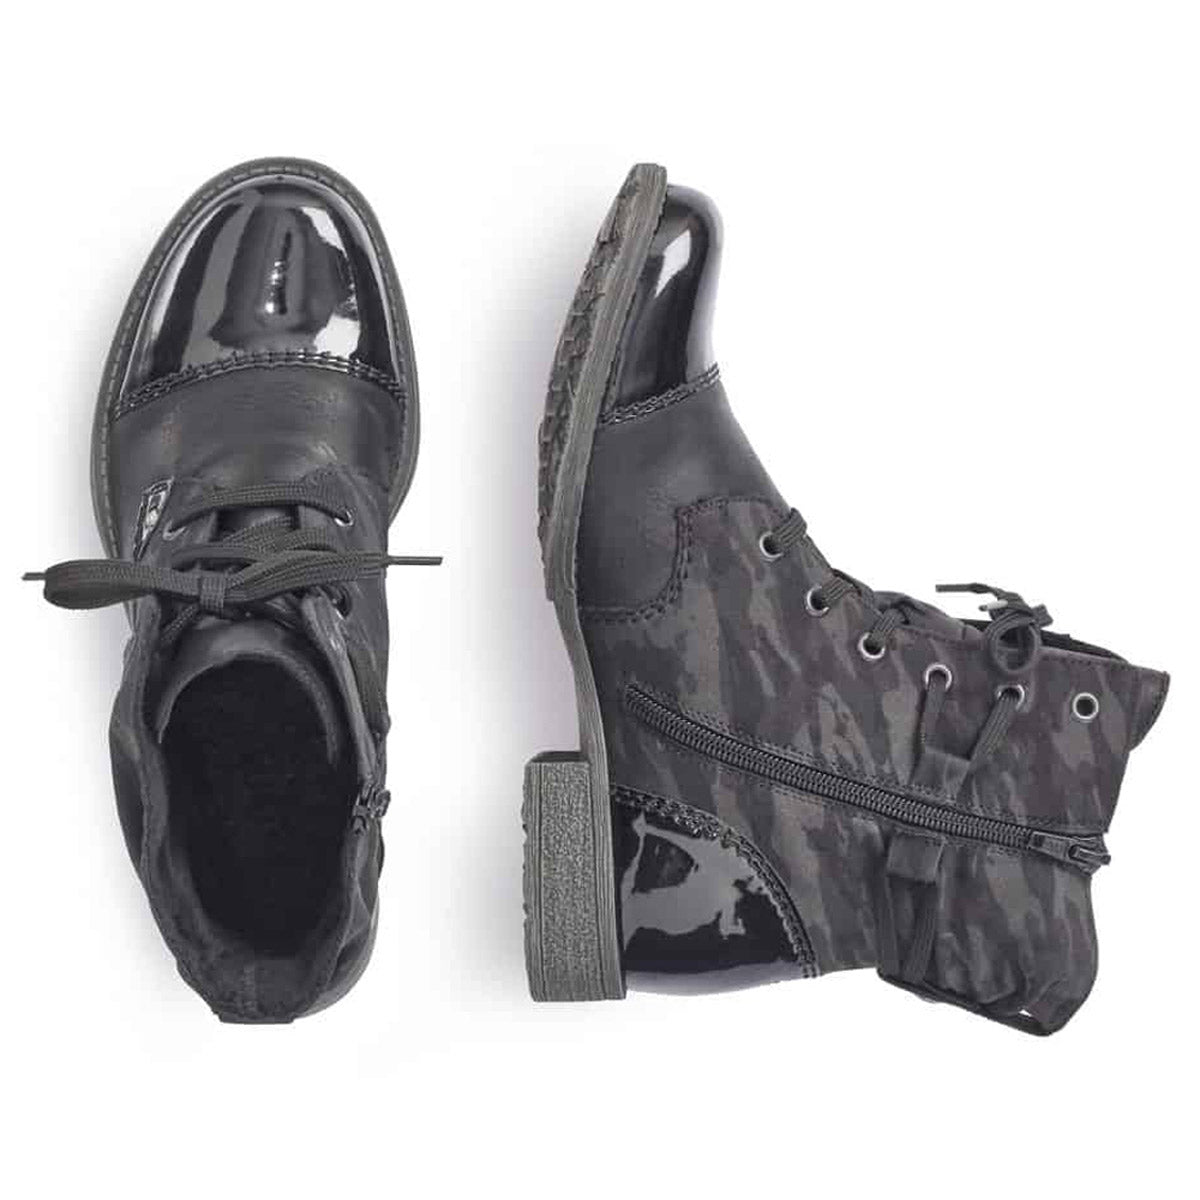 A pair of mismatched shoes: one black dress shoe and one Rieker lace-up bootie in the RIEKER LACE UP BOOTIE BLACK CAMO PRINT - WOMENS style, both isolated on a white background.